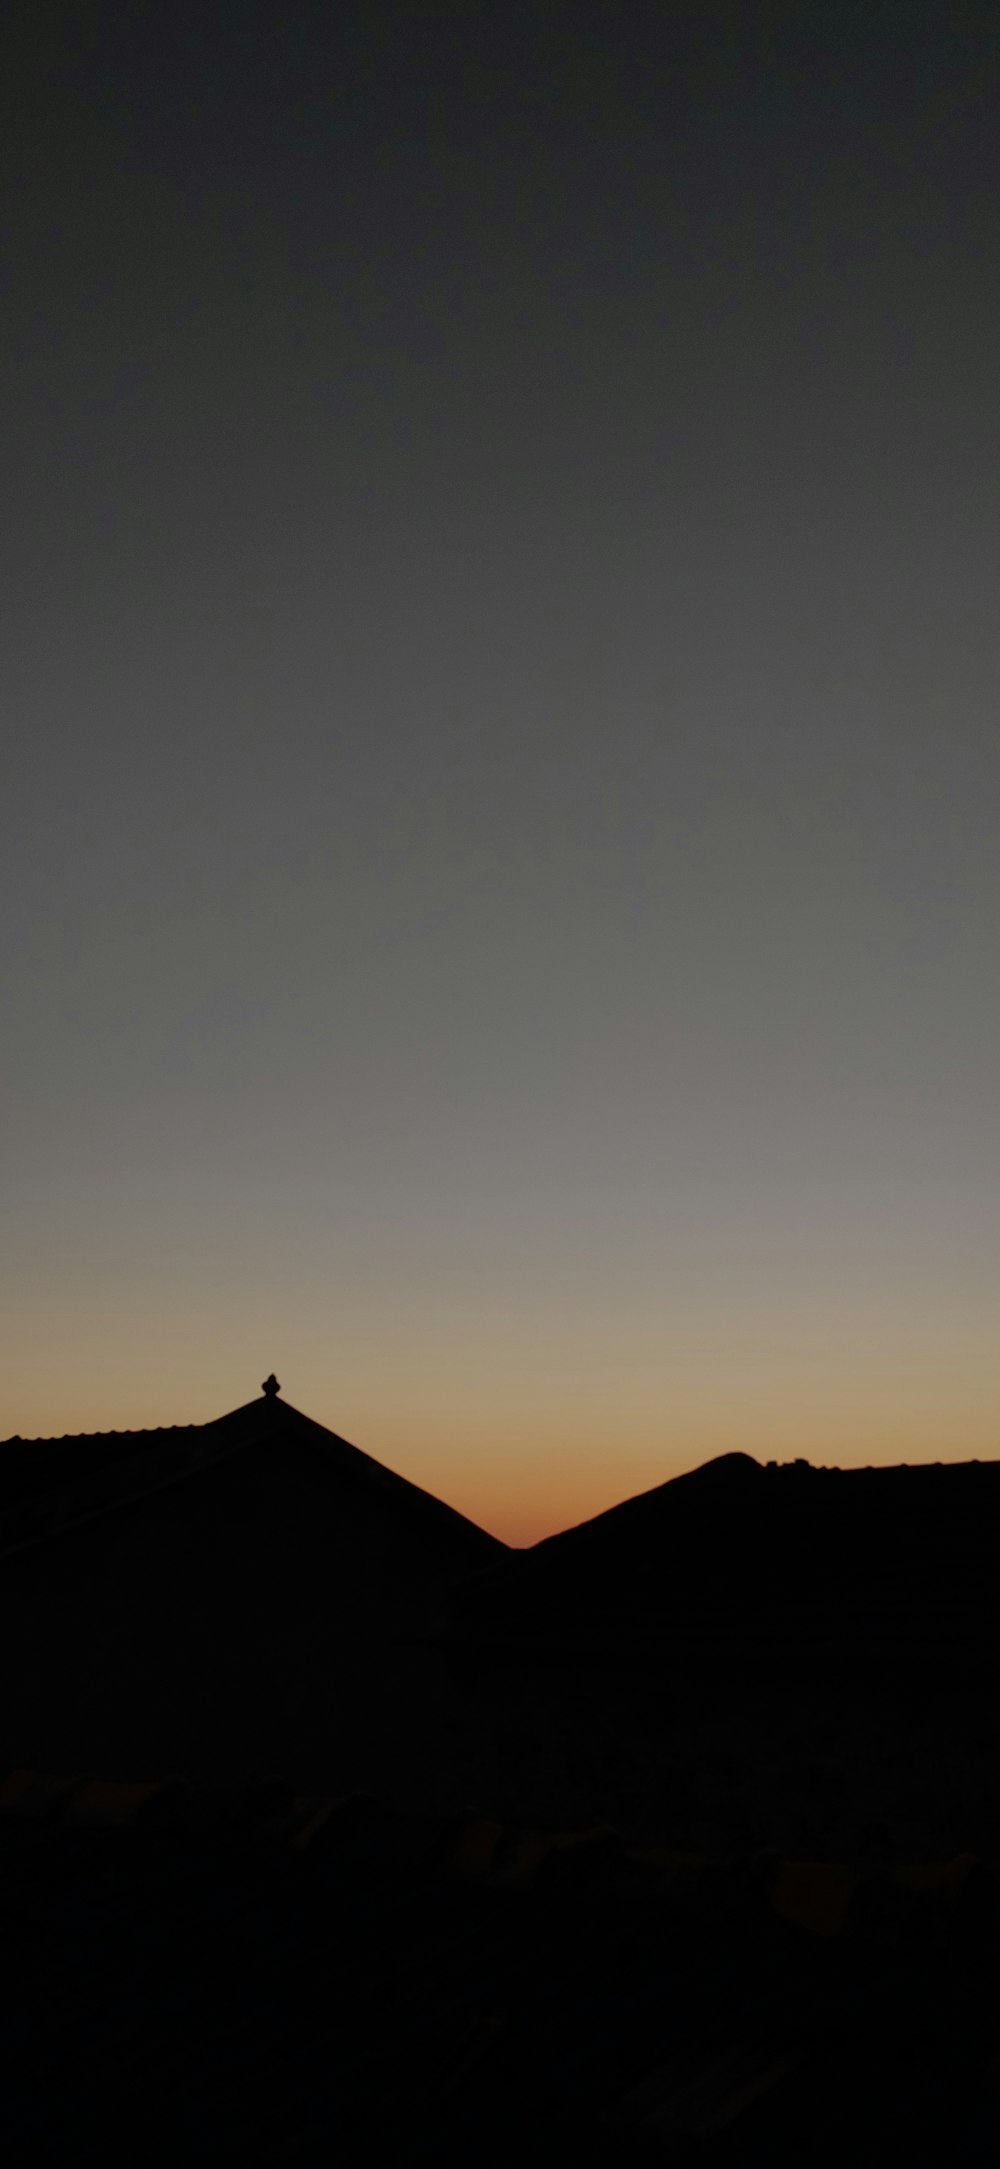 the silhouette of a hill with a cross on top of it